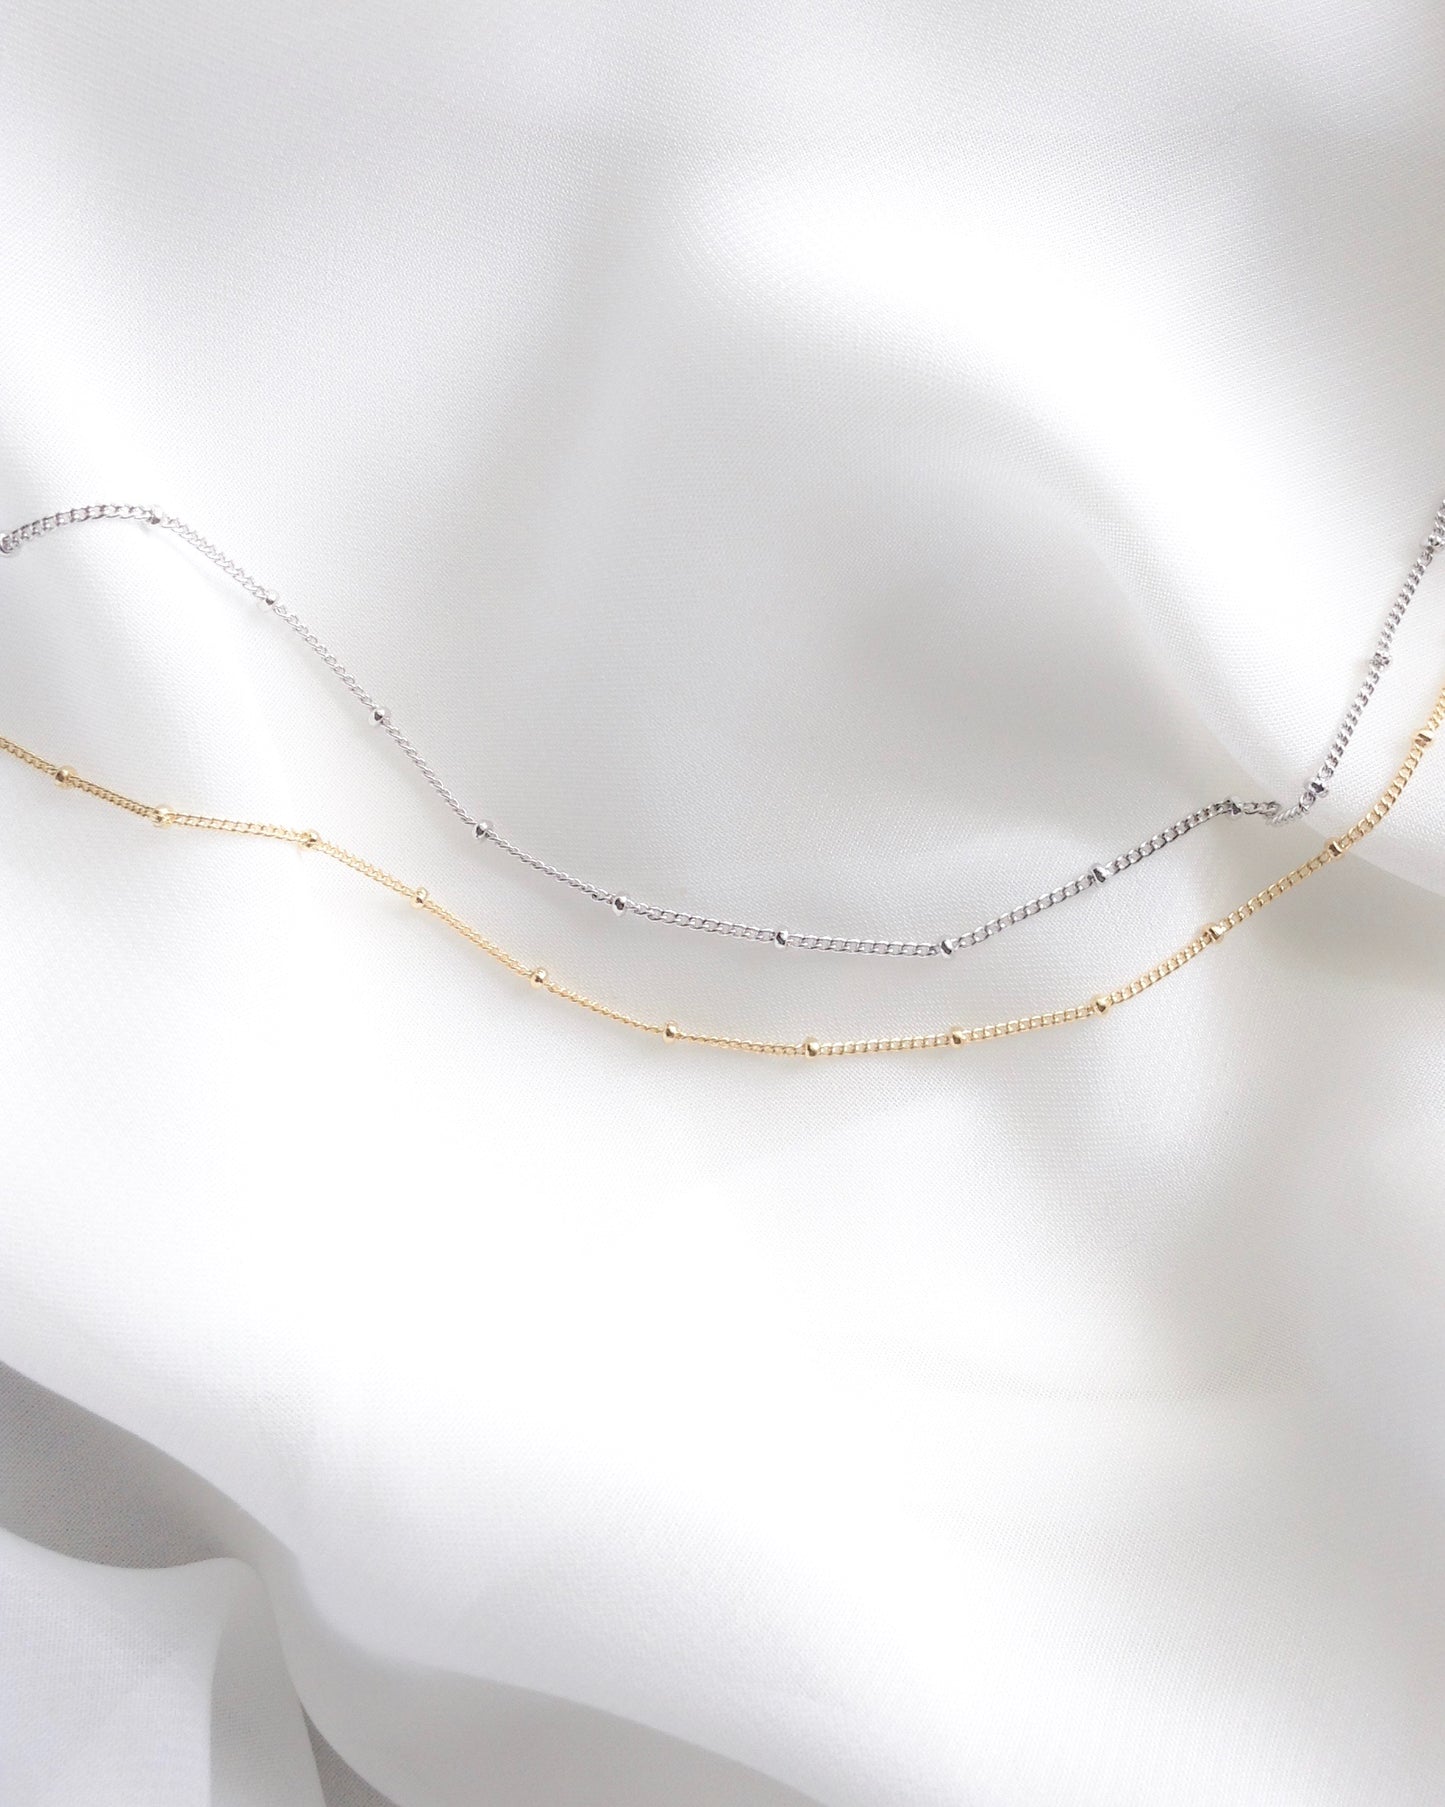 Simple Delicate Bracelet In Gold Filled or Sterling Silver | IB Jewelry